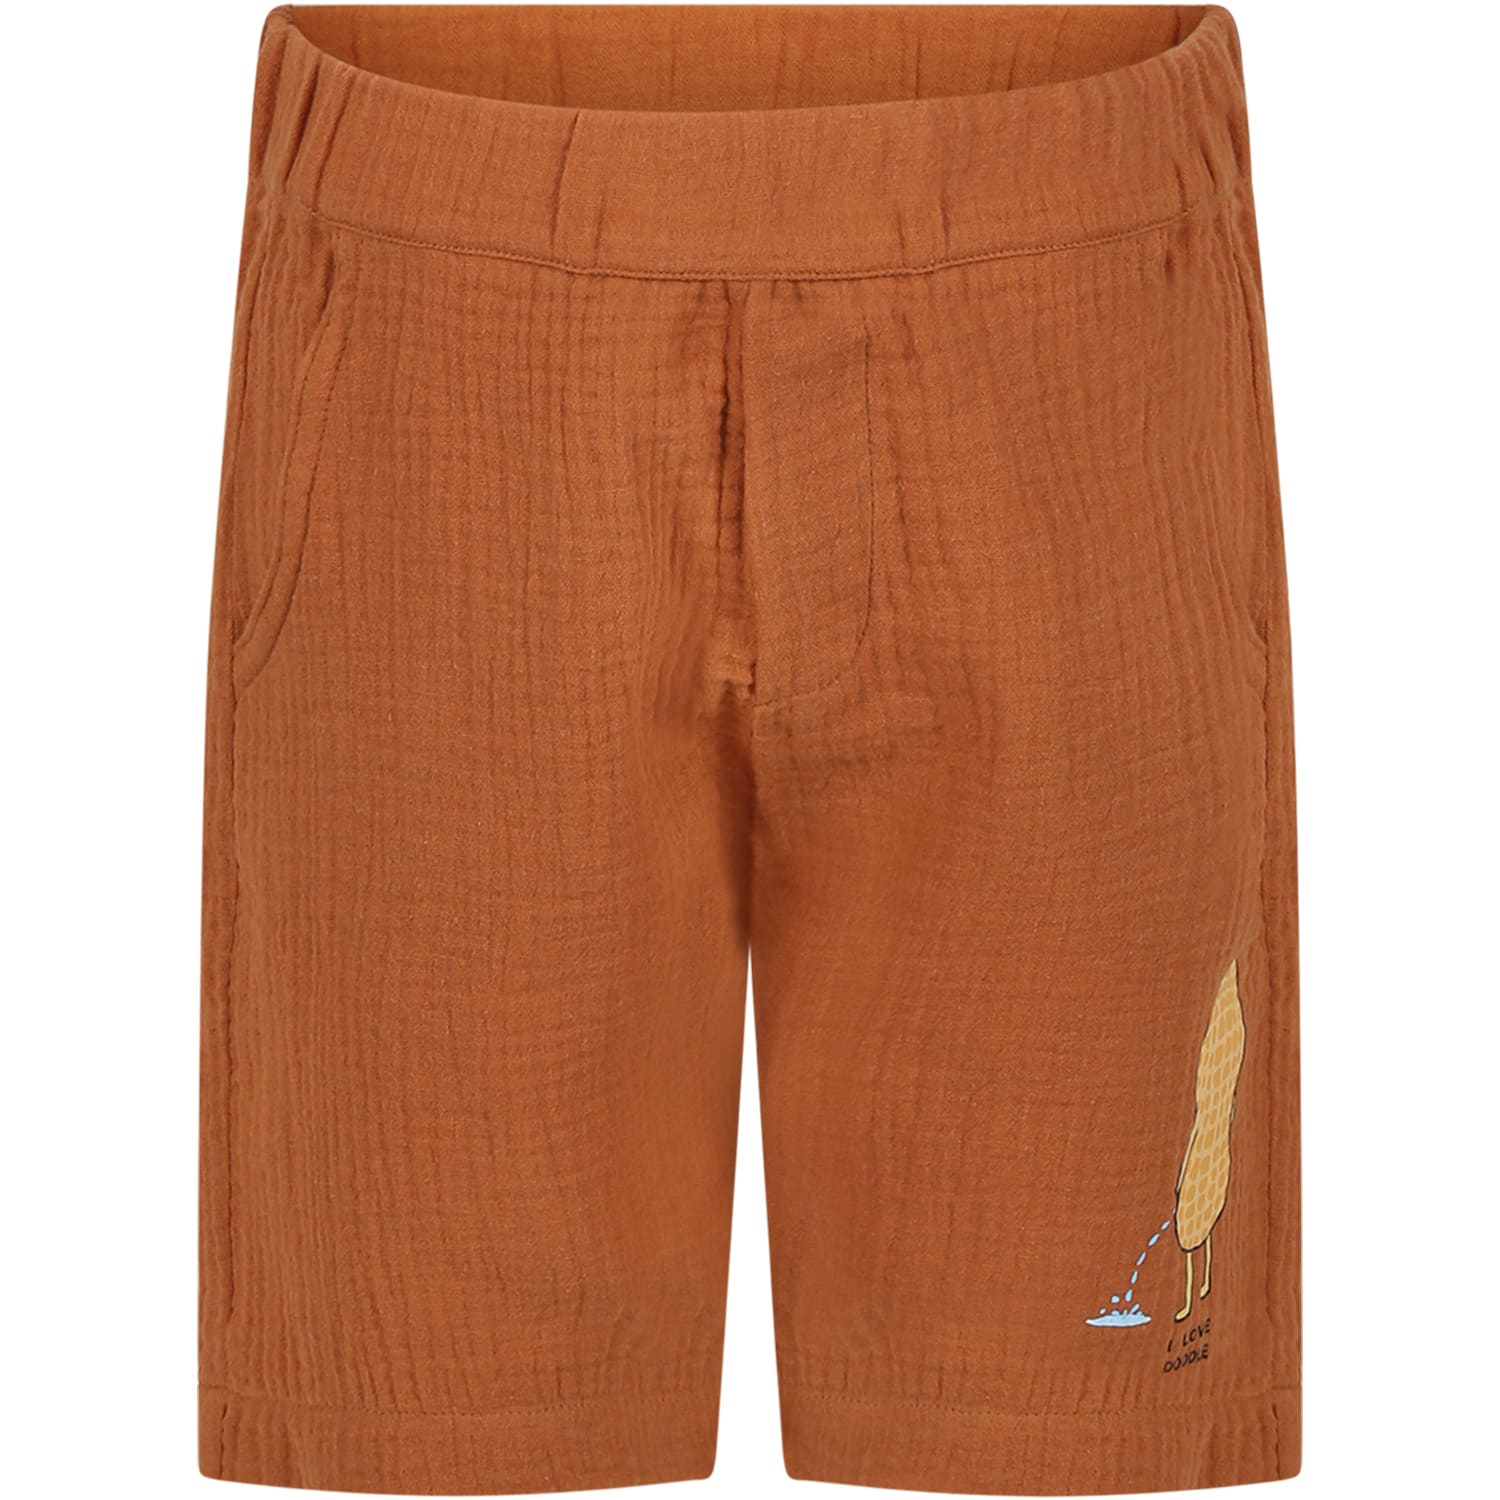 Le Petit Coco Kids' Brown Shorts For Boy With Print And I Love Doodle Writing